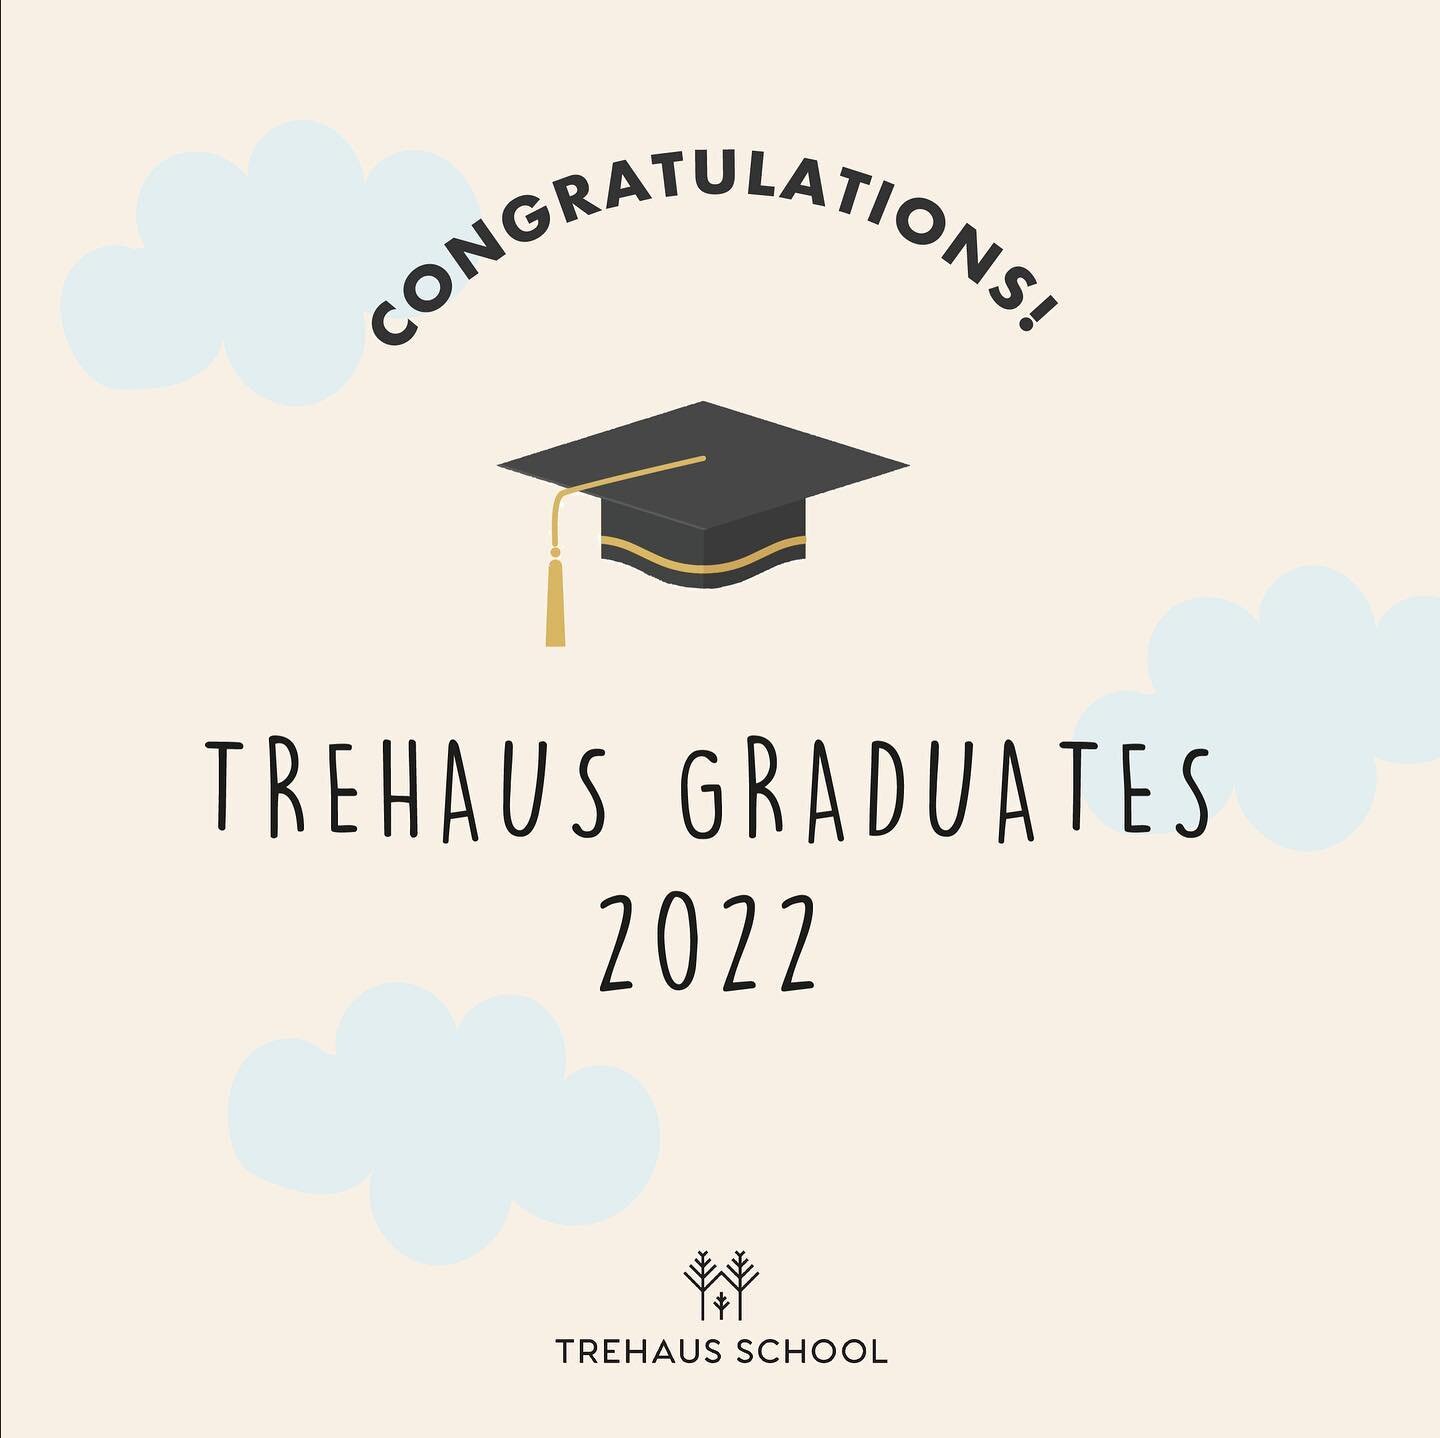 A huge congratulations to our Trehaus School Class of 2022! 

We are so proud of you all and wish you the very best in the next step of your learning journey.

#trehausschool #classof2022 #graduation #futurekids #changemakers